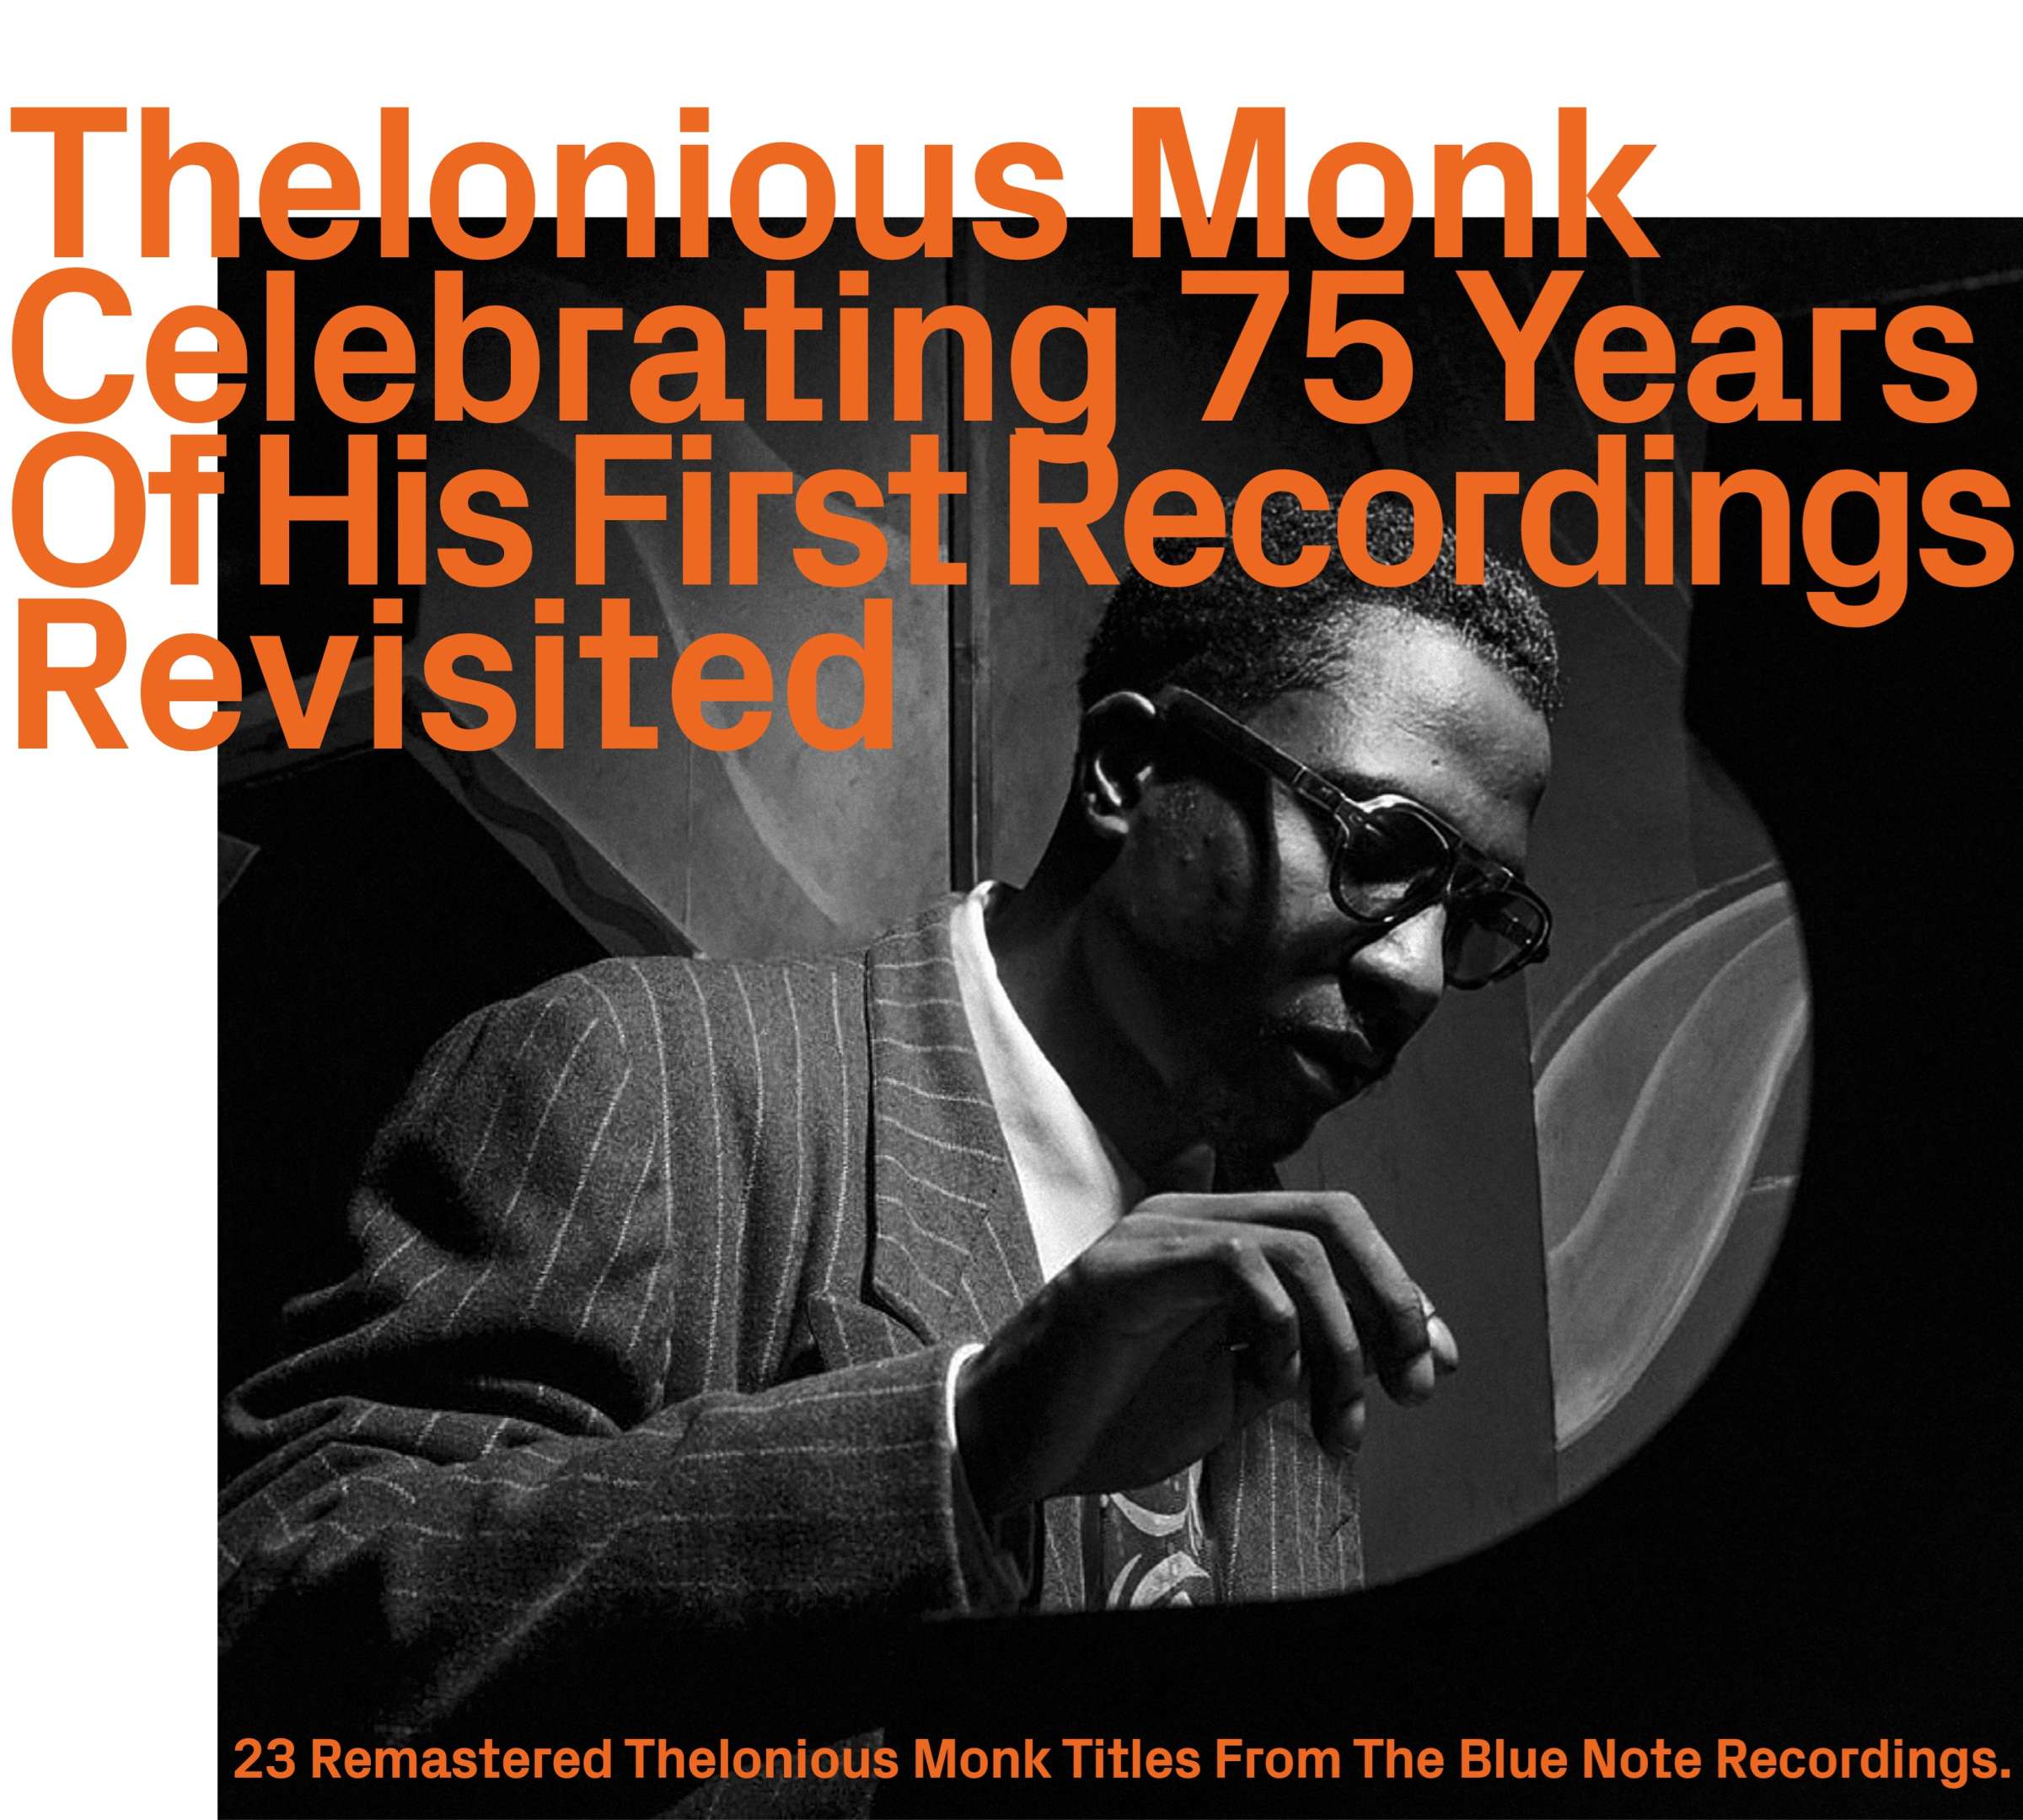 Thelonious Monk, Celebrating 75 Years Of His First Recording Revisited